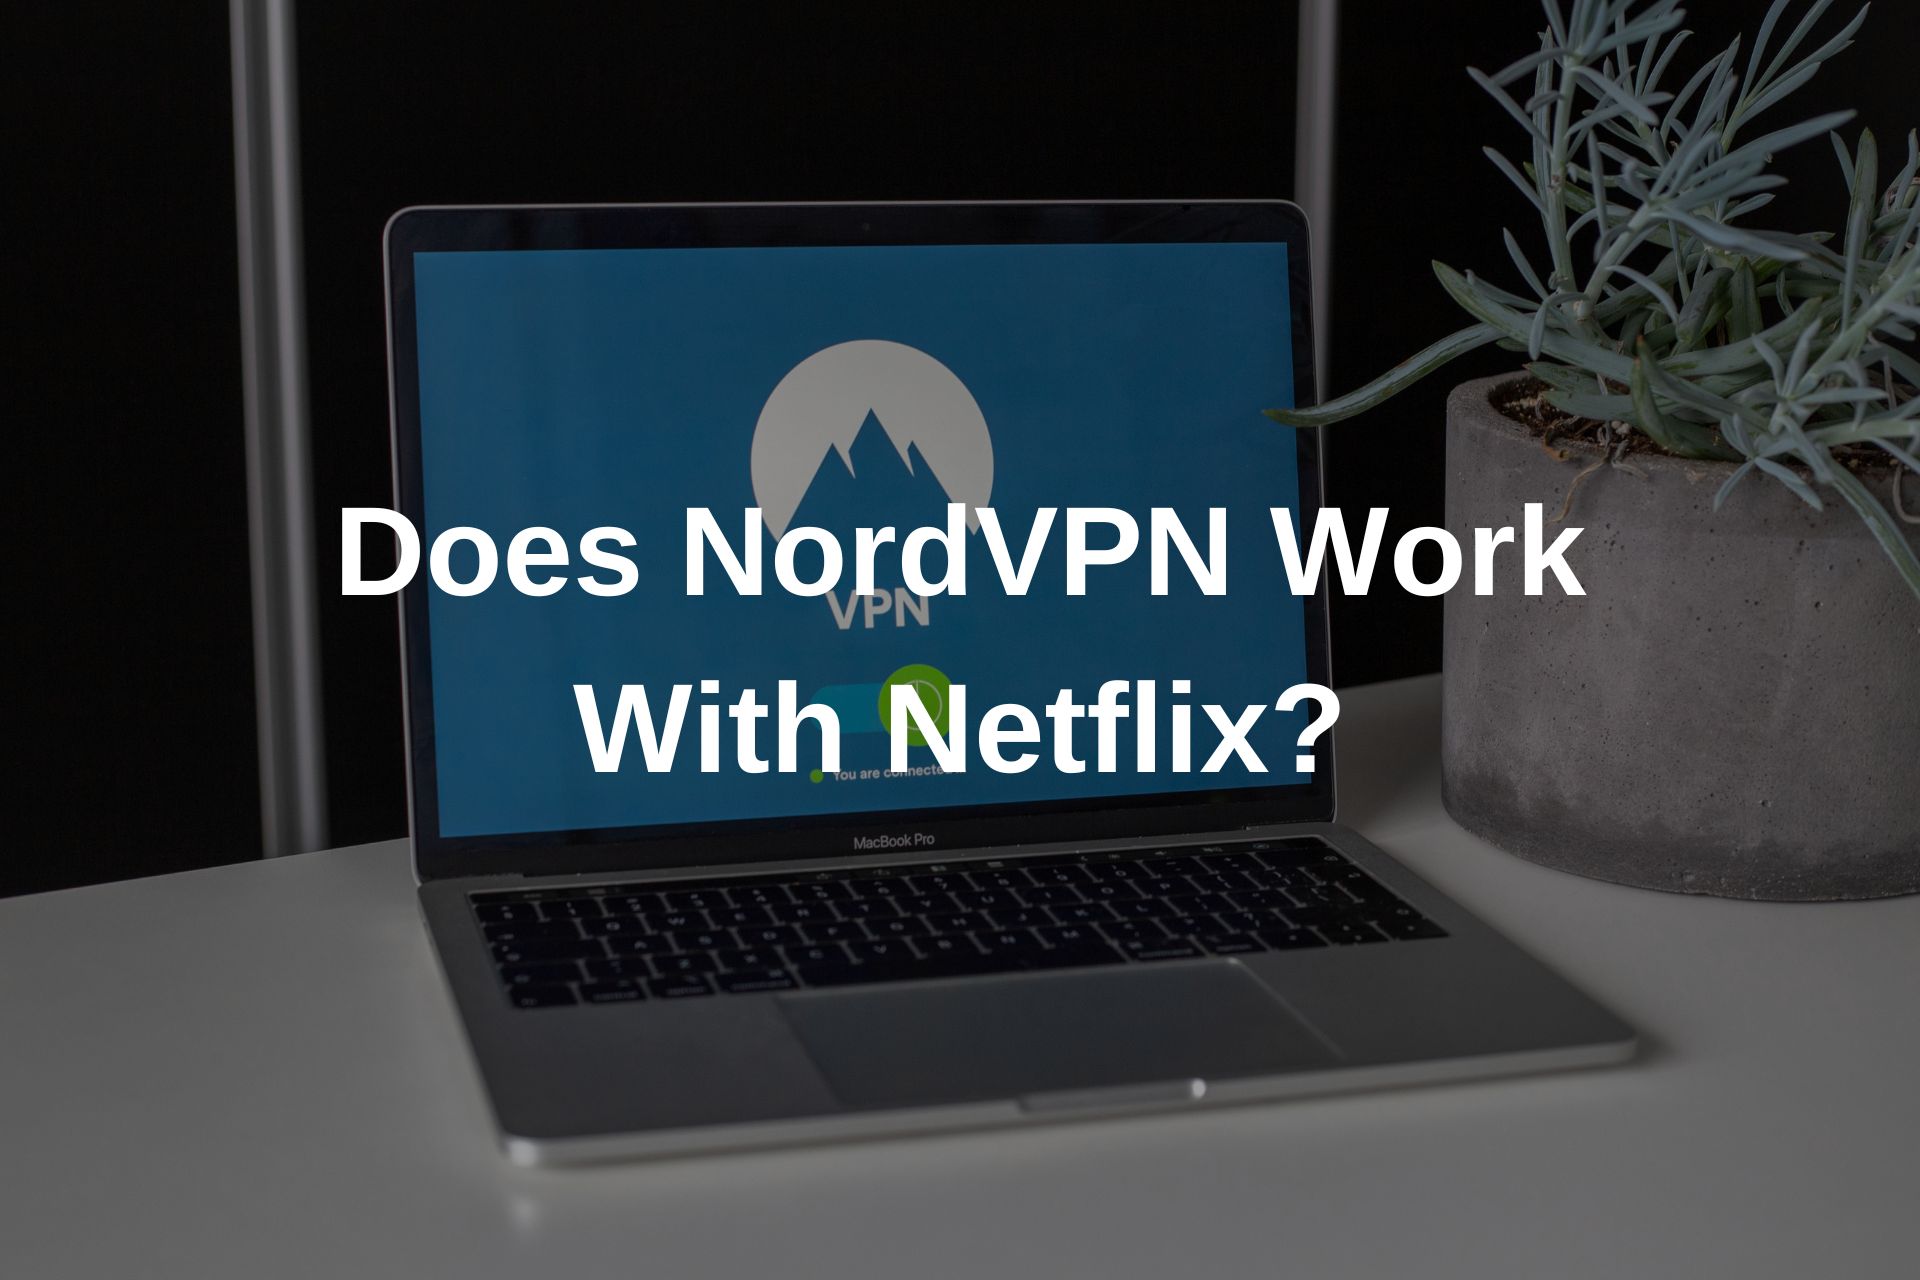 Does NordVPN Work With Netflix